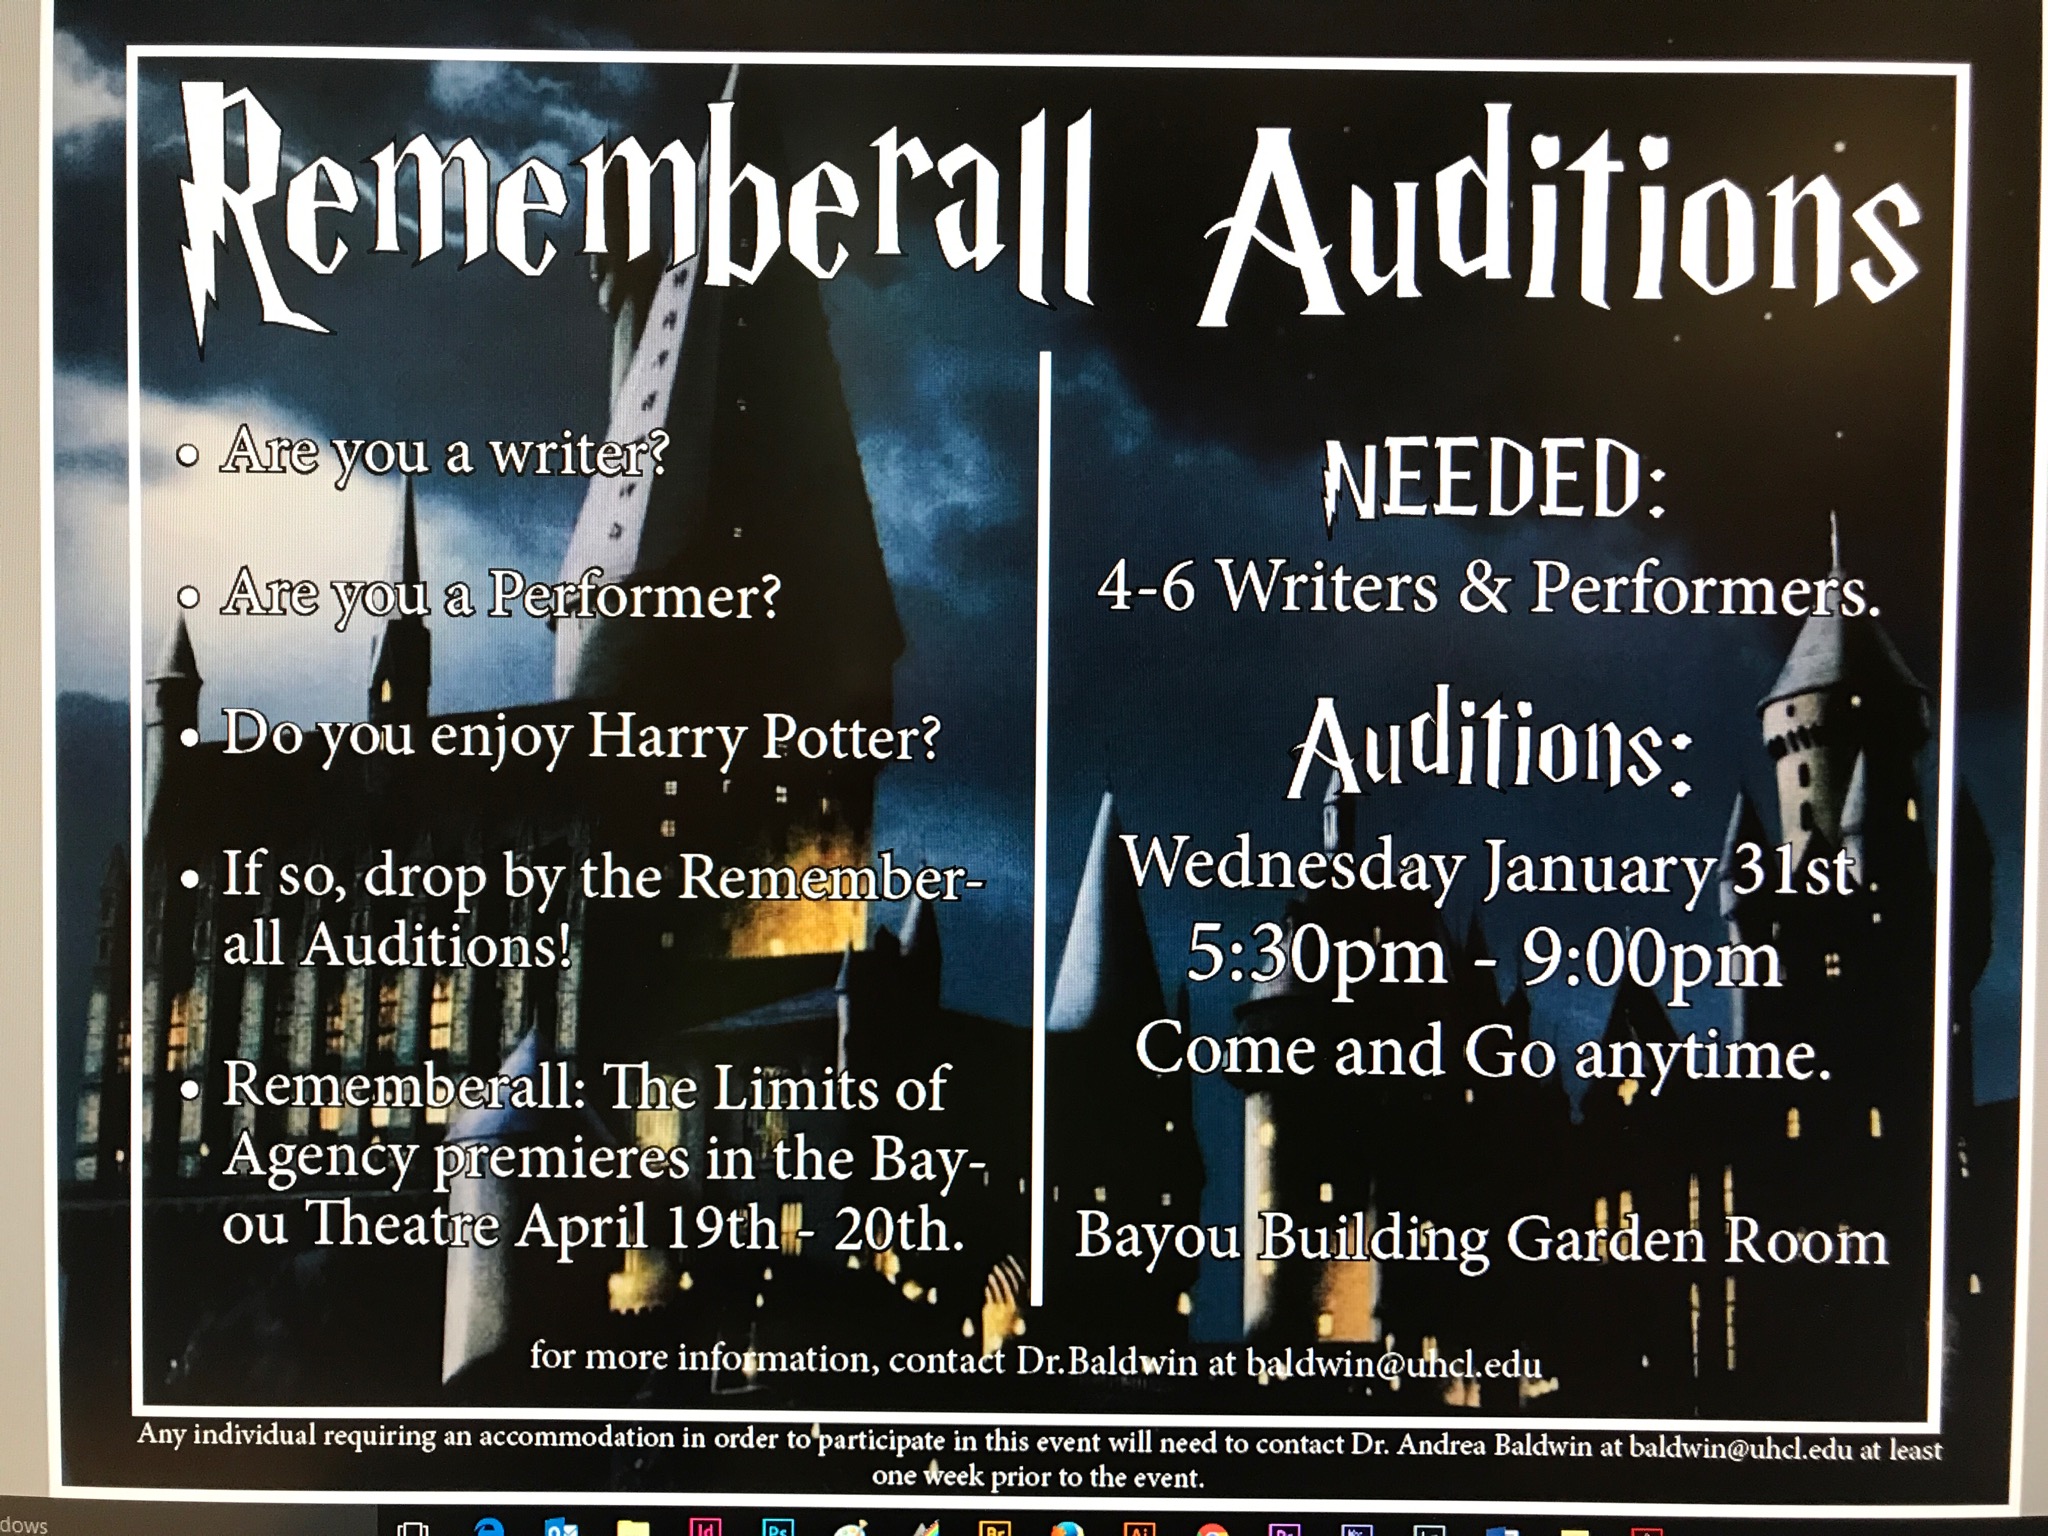 GRAPHIC: A flyer for the Rememberall auditions held Jan. 31. Photo courtesy of Andrea Baldwin, lecturer in communication.